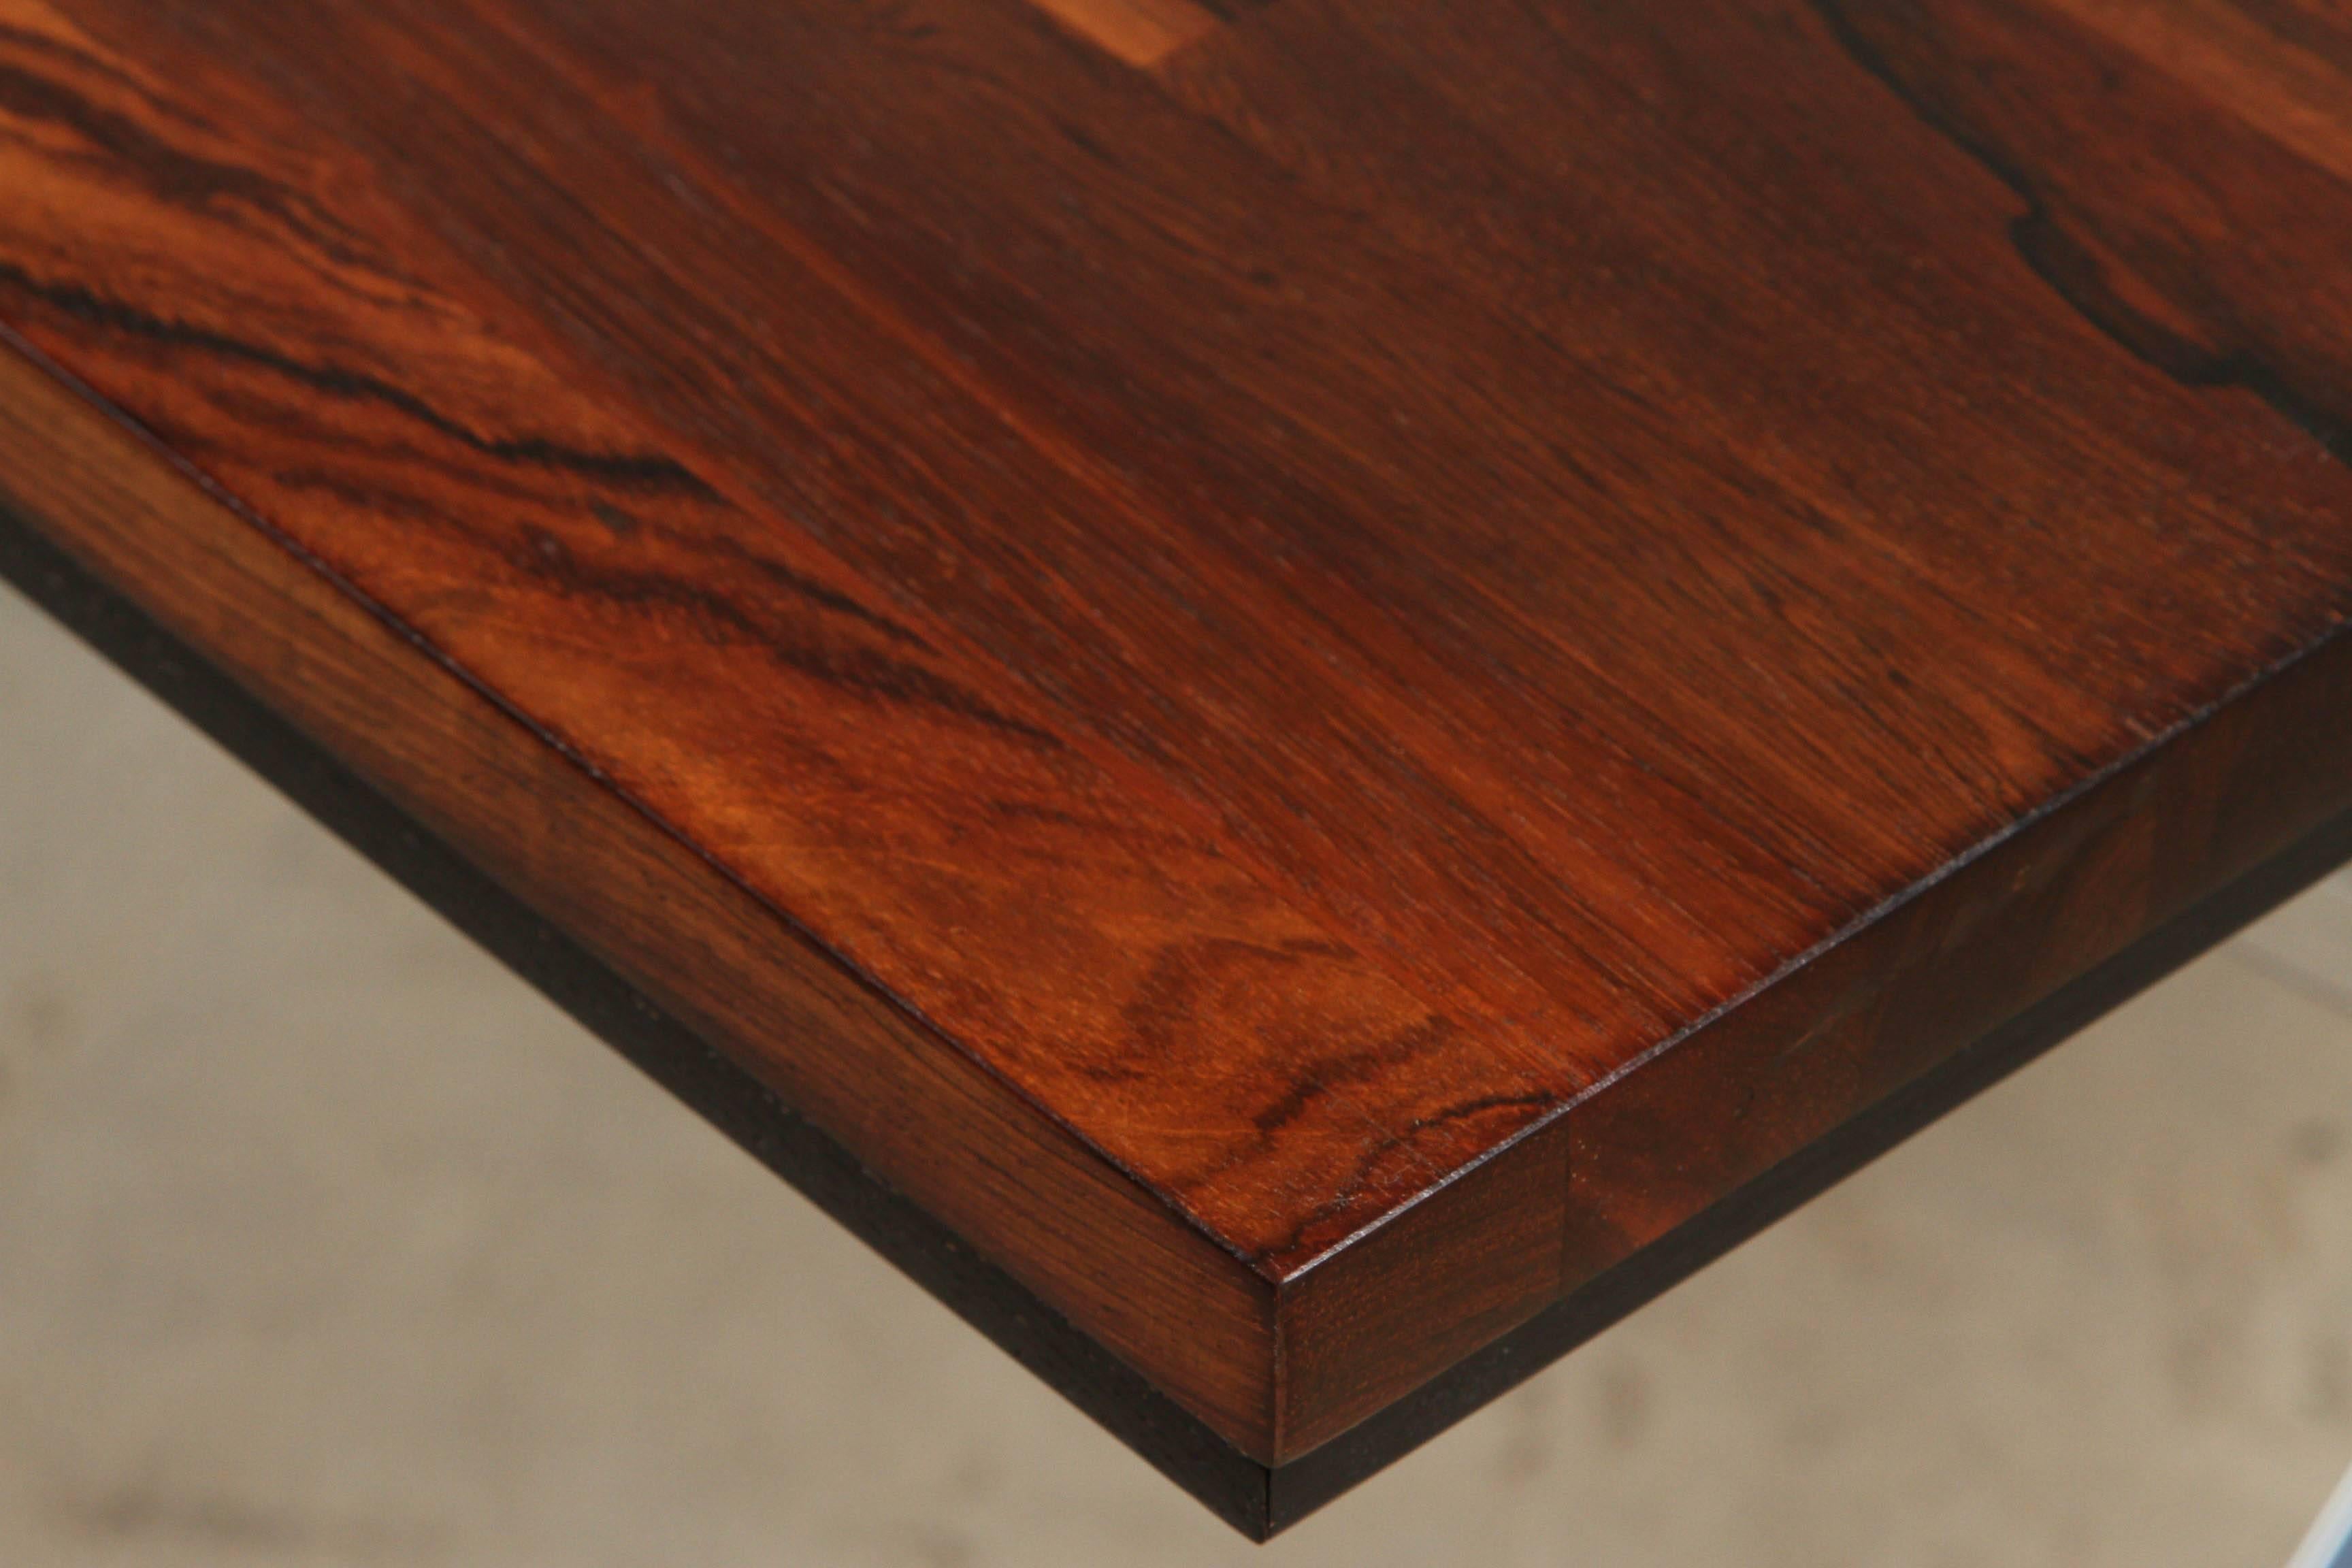 Solid Rosewood Desk with Stainless Base by Jules Heumann for Metropolitan Group 1